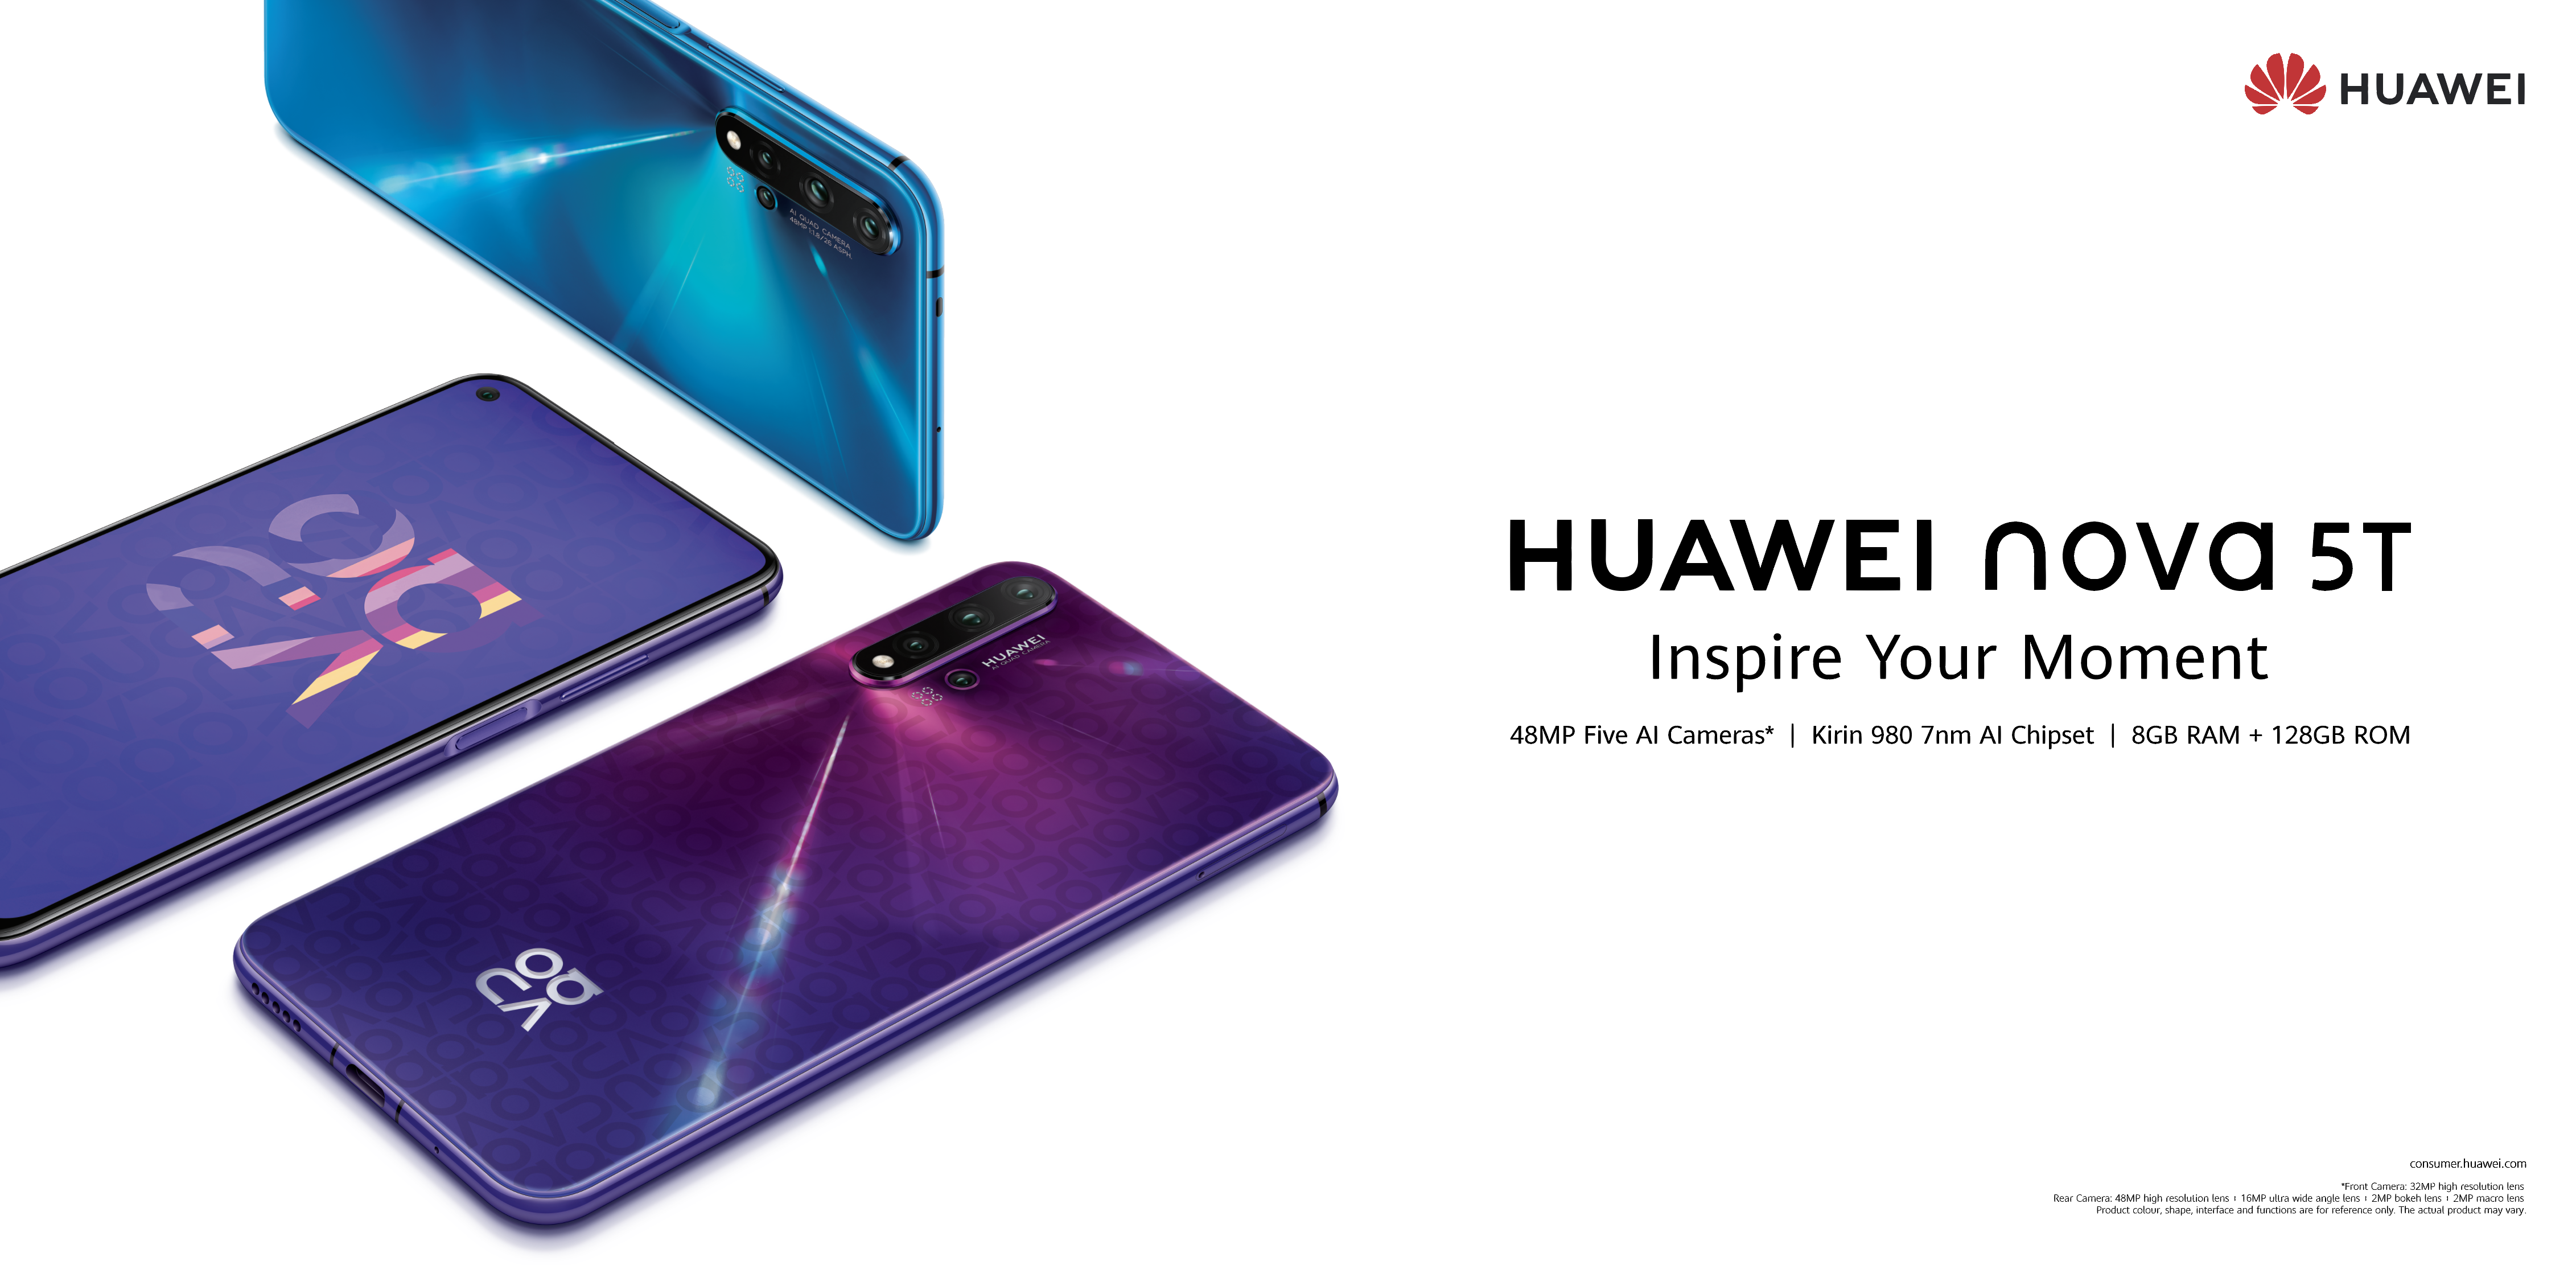 Huawei market share in China to hit 50% in 2020